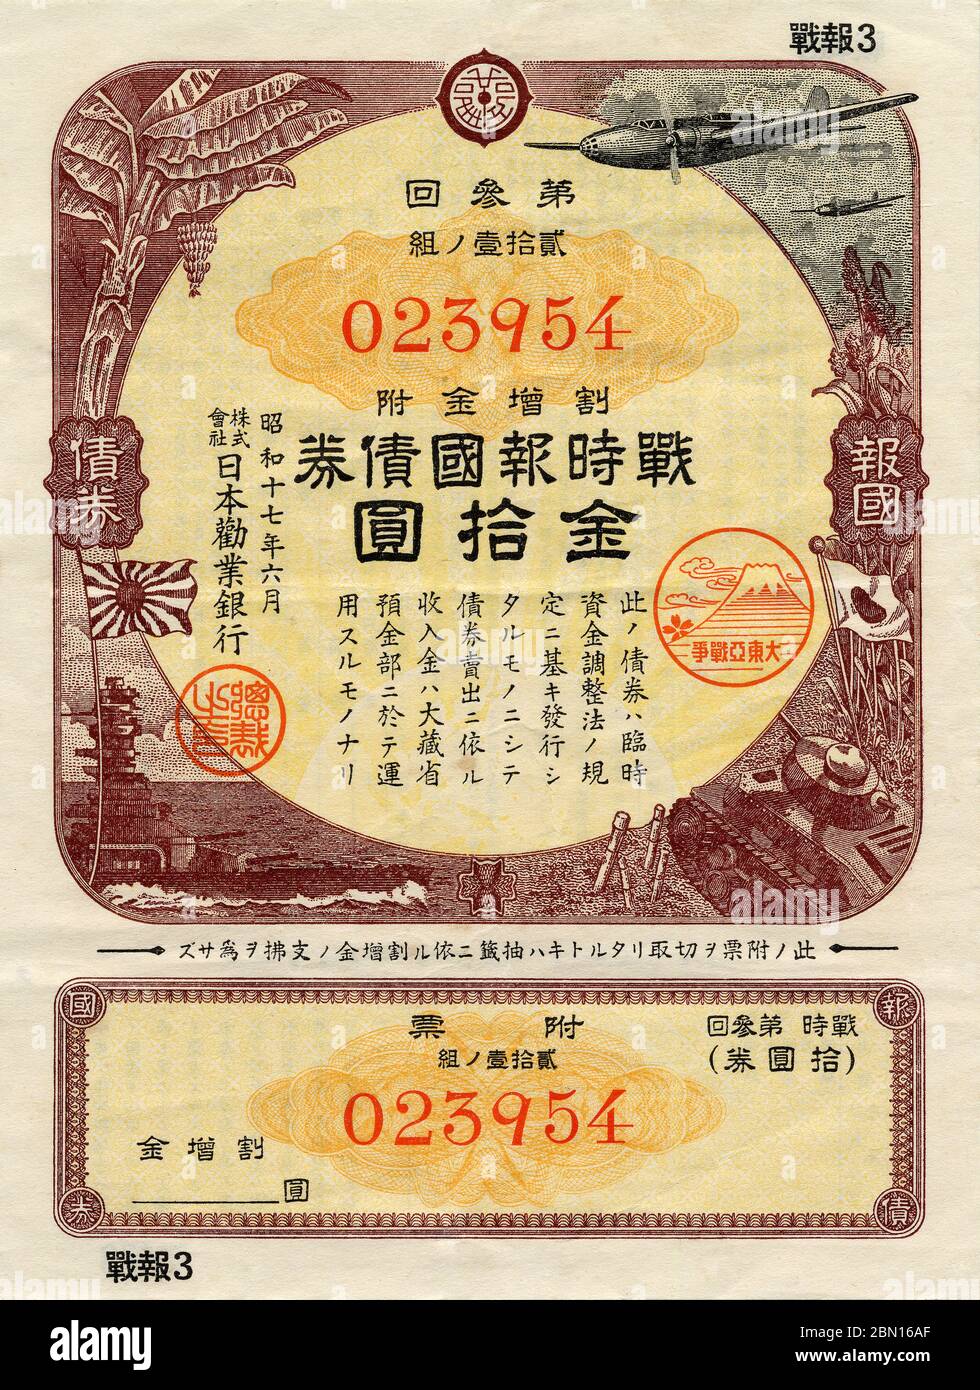 [ 1942 Japan - Japanese Pacific War Bond ] —   Pacific War Bond of 10 yen issued by the Imperial Government of Japan in 1942 (Showa 17), featuring Japanese WWII warplanes, a tank and a navy ship.  There were 21 releases. Release 2 through 7 all have the same so-called battle flags design. The 1st release and releases after the 7th show different designs.  In the 1930s and 1940s, 'voluntary' savings were so greatly encouraged to finance the Japanese war effort that by 1944 (Showa 19) Japanese households were saving an incredible 39.5% of disposable income.  20th century vintage bond. Stock Photo